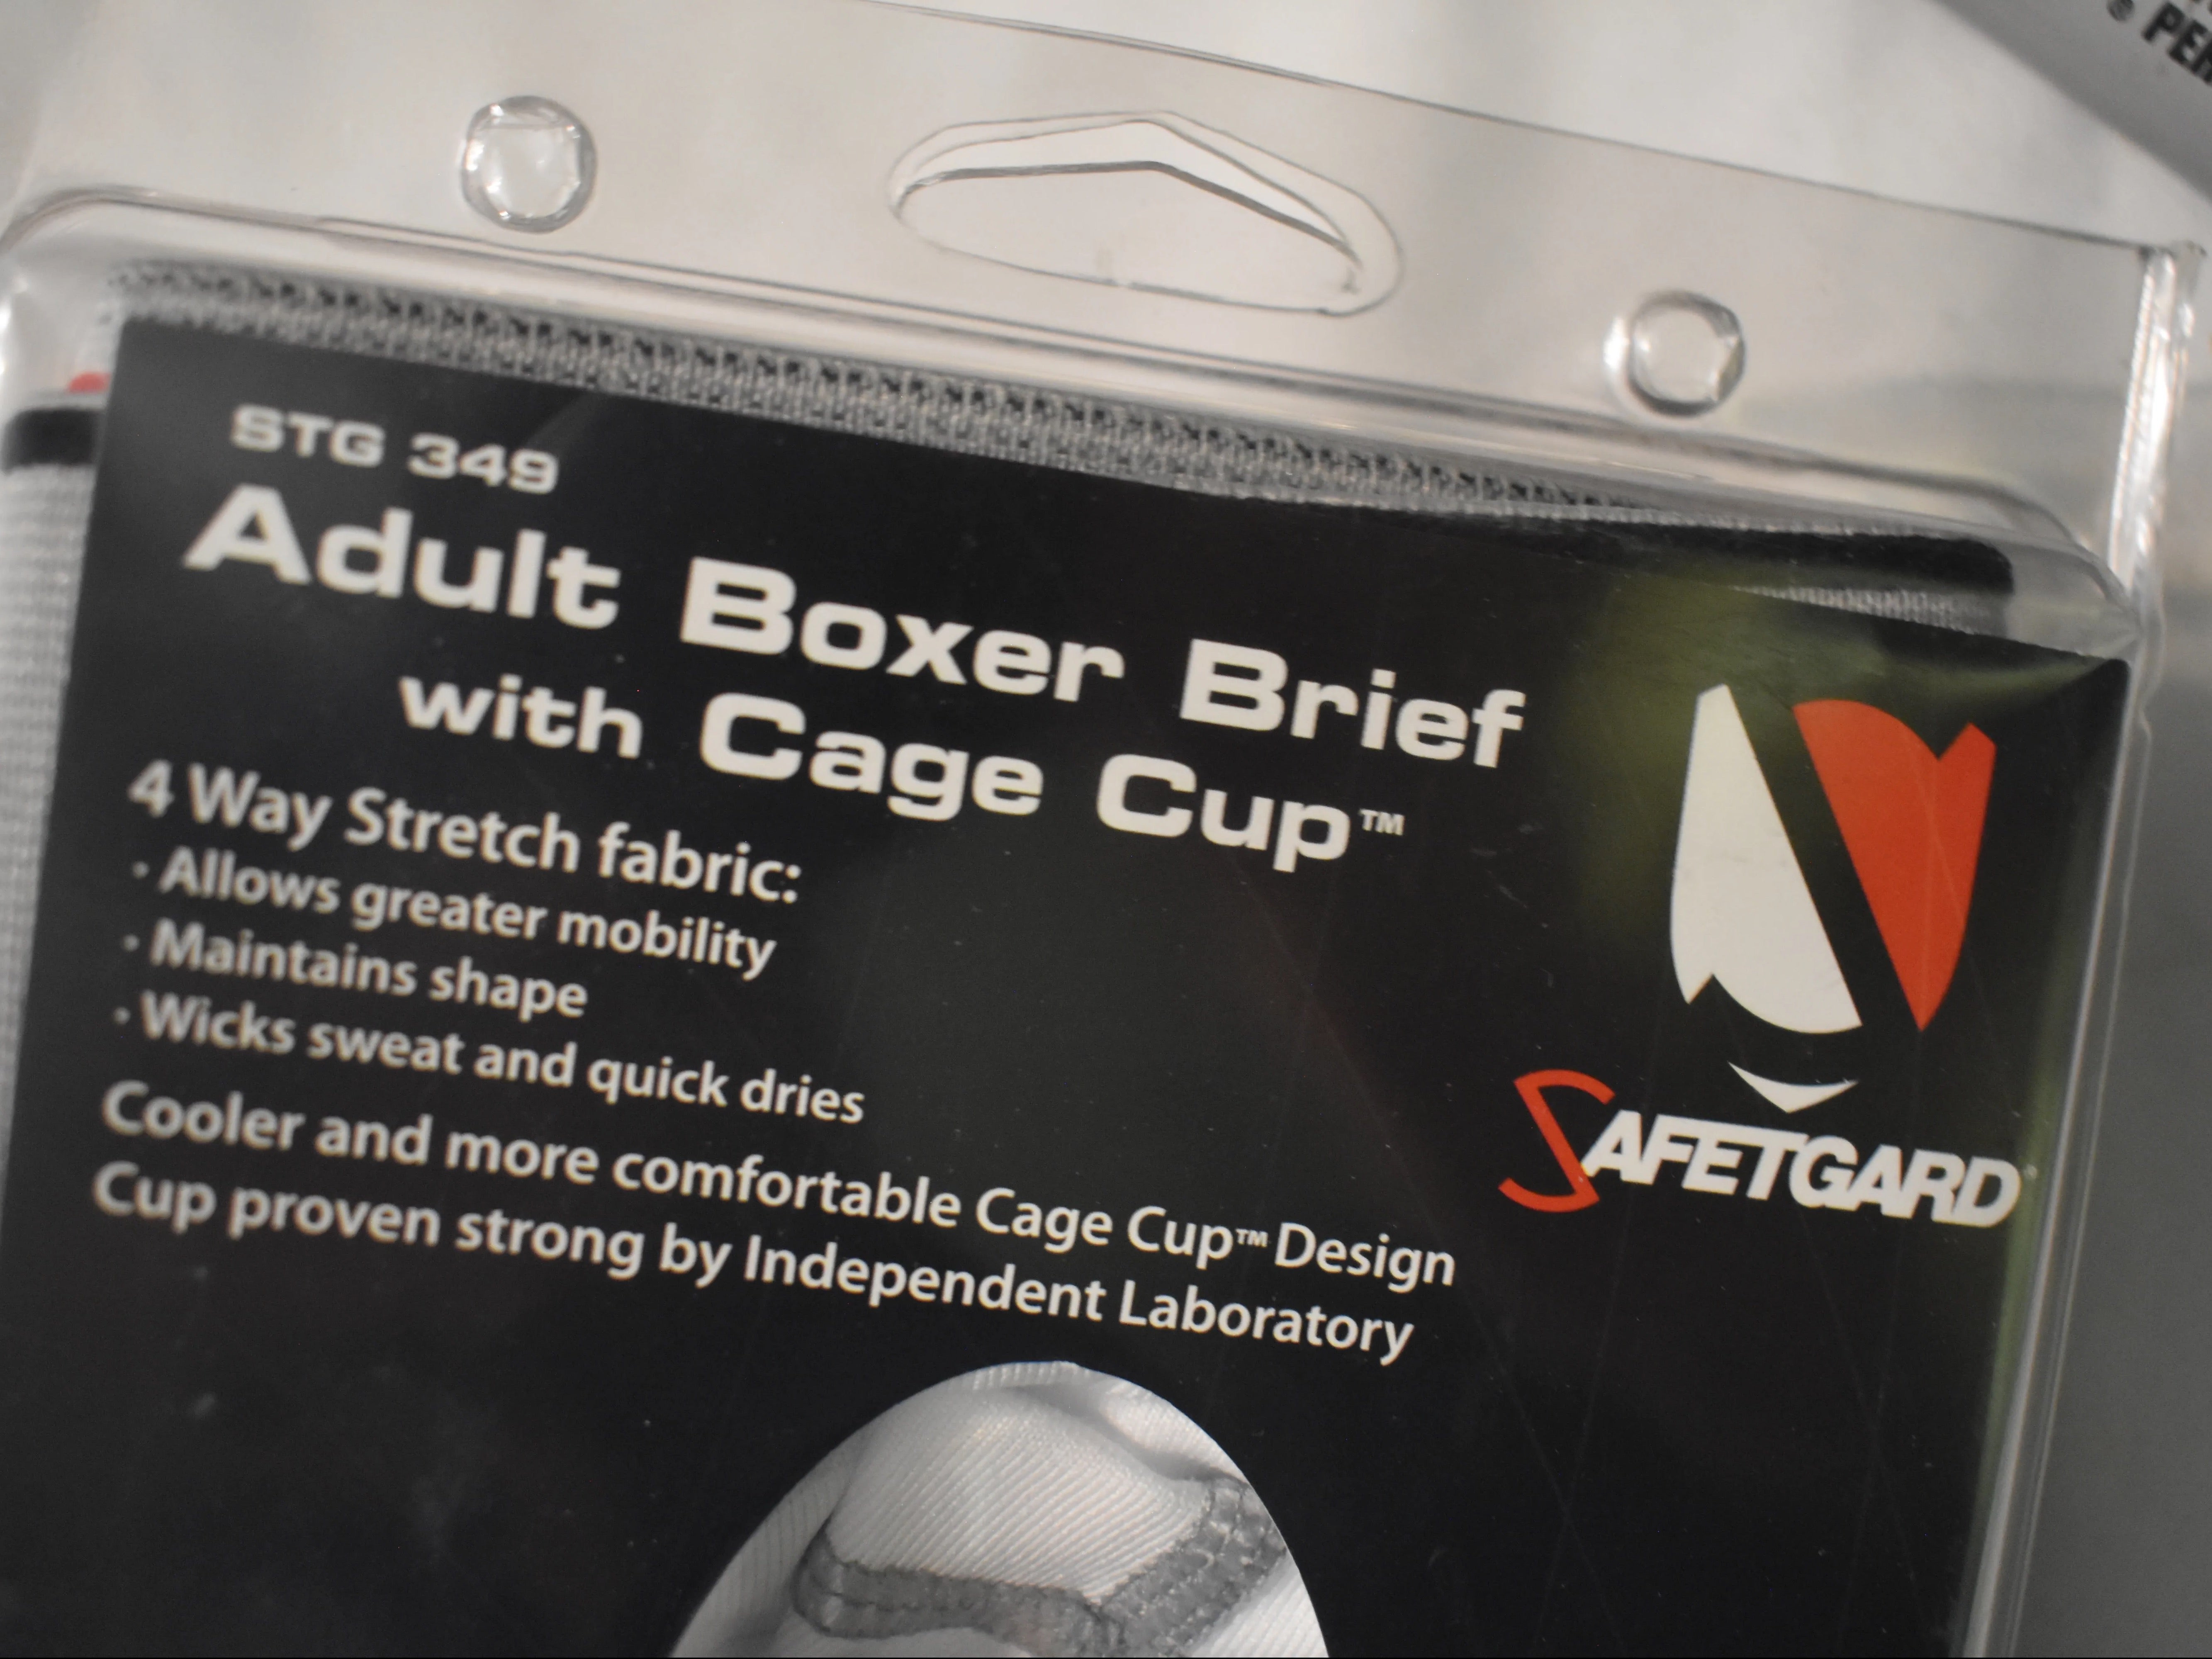 Boxer Brief with Cage Cup® Model STG349 - SafeTGard